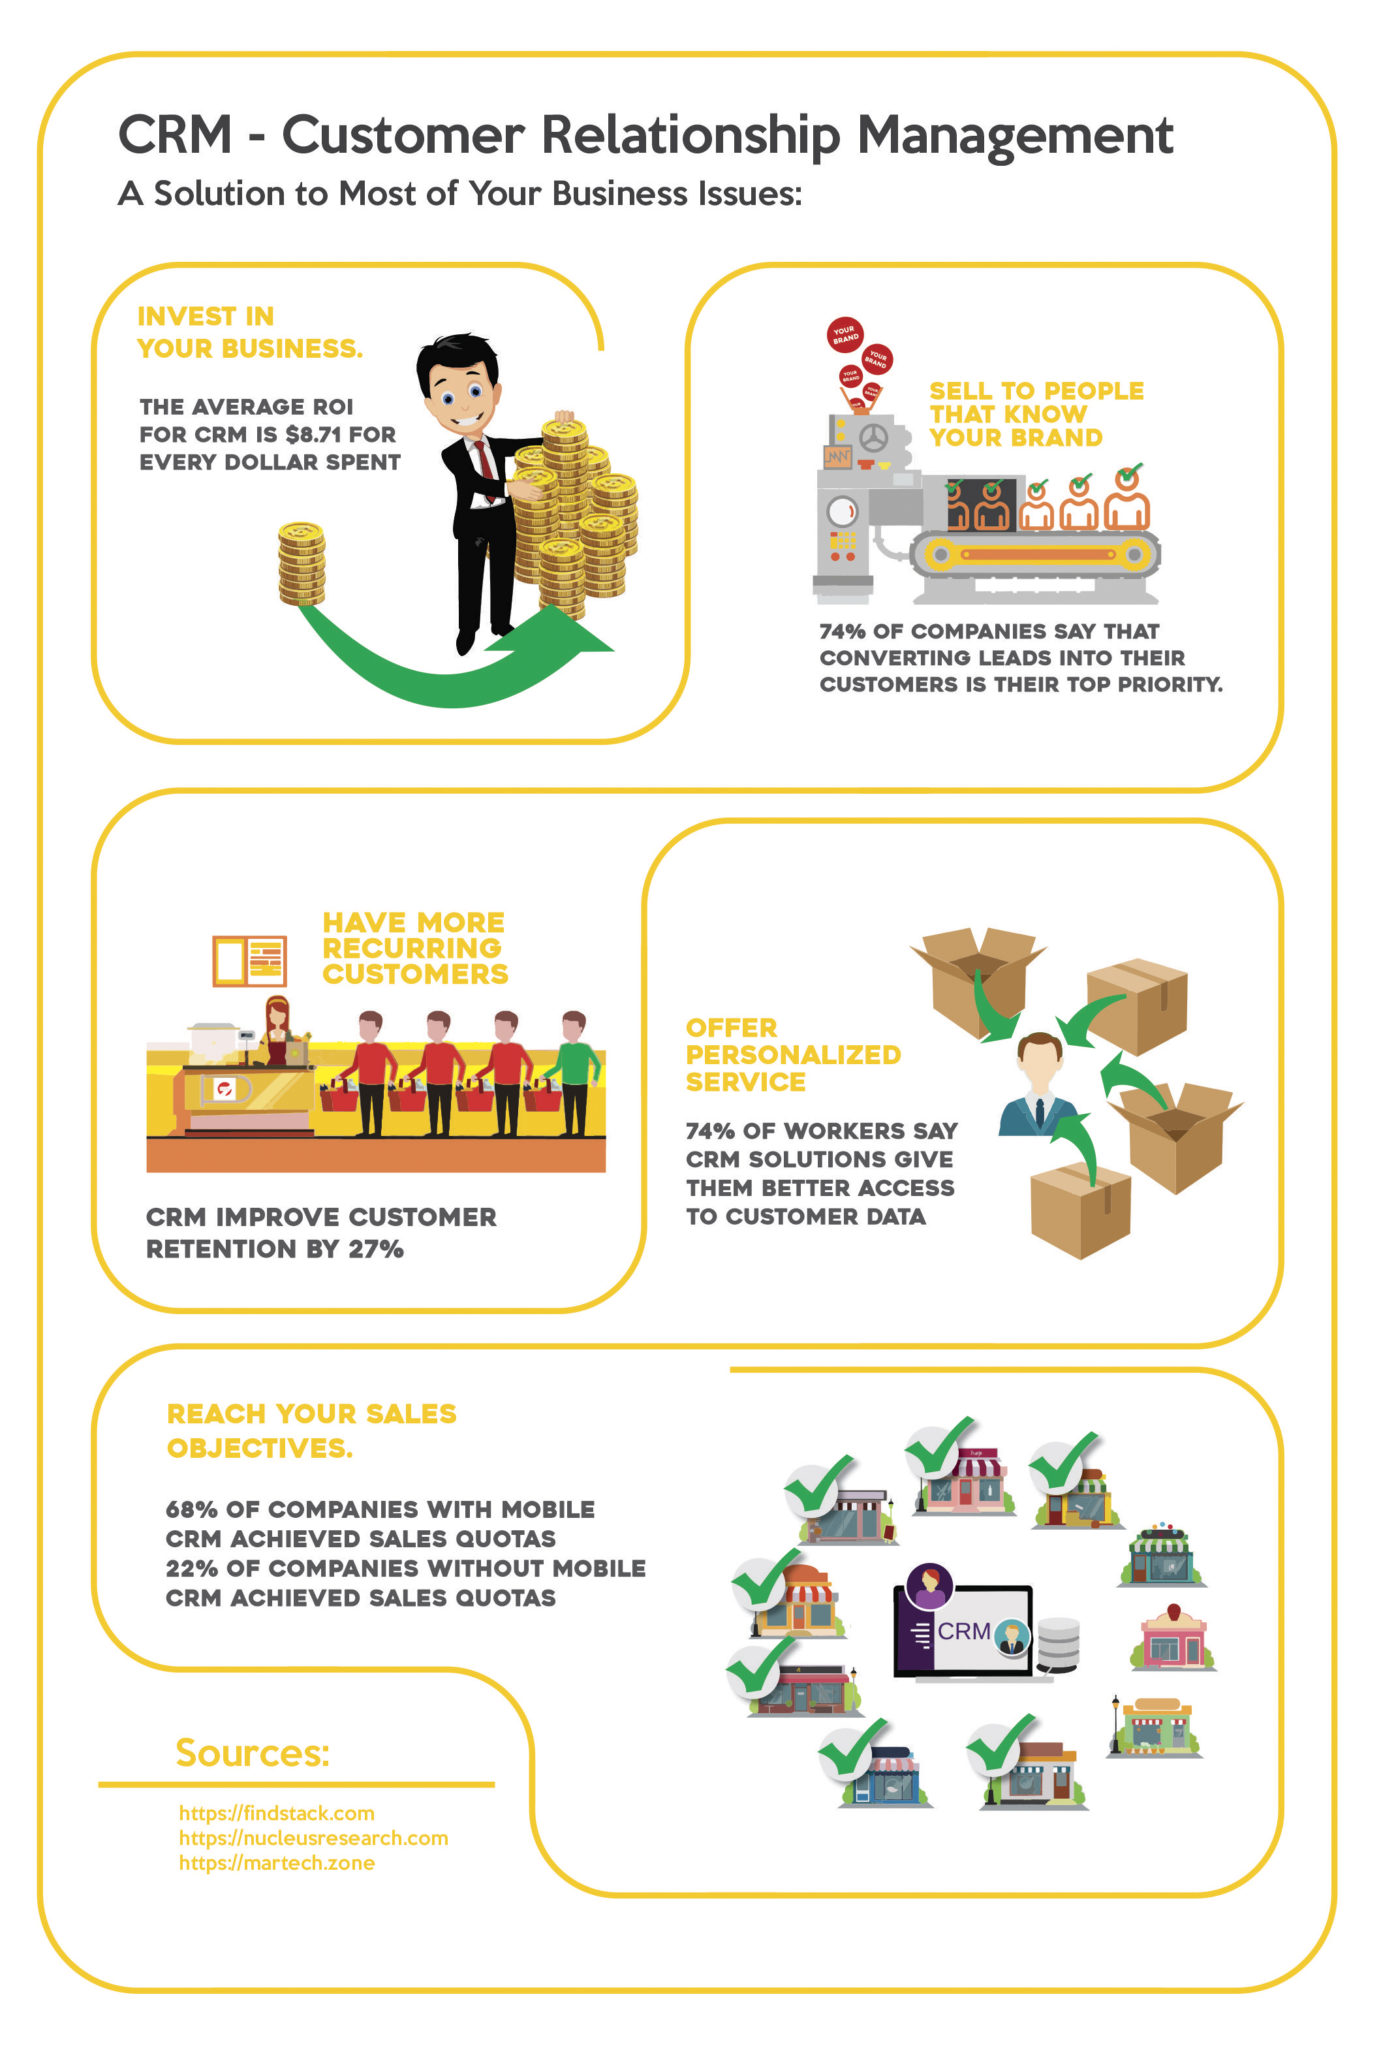 Infographic illustrating data on CRM - Customer Relationship Management - and its effects on Canadian companies